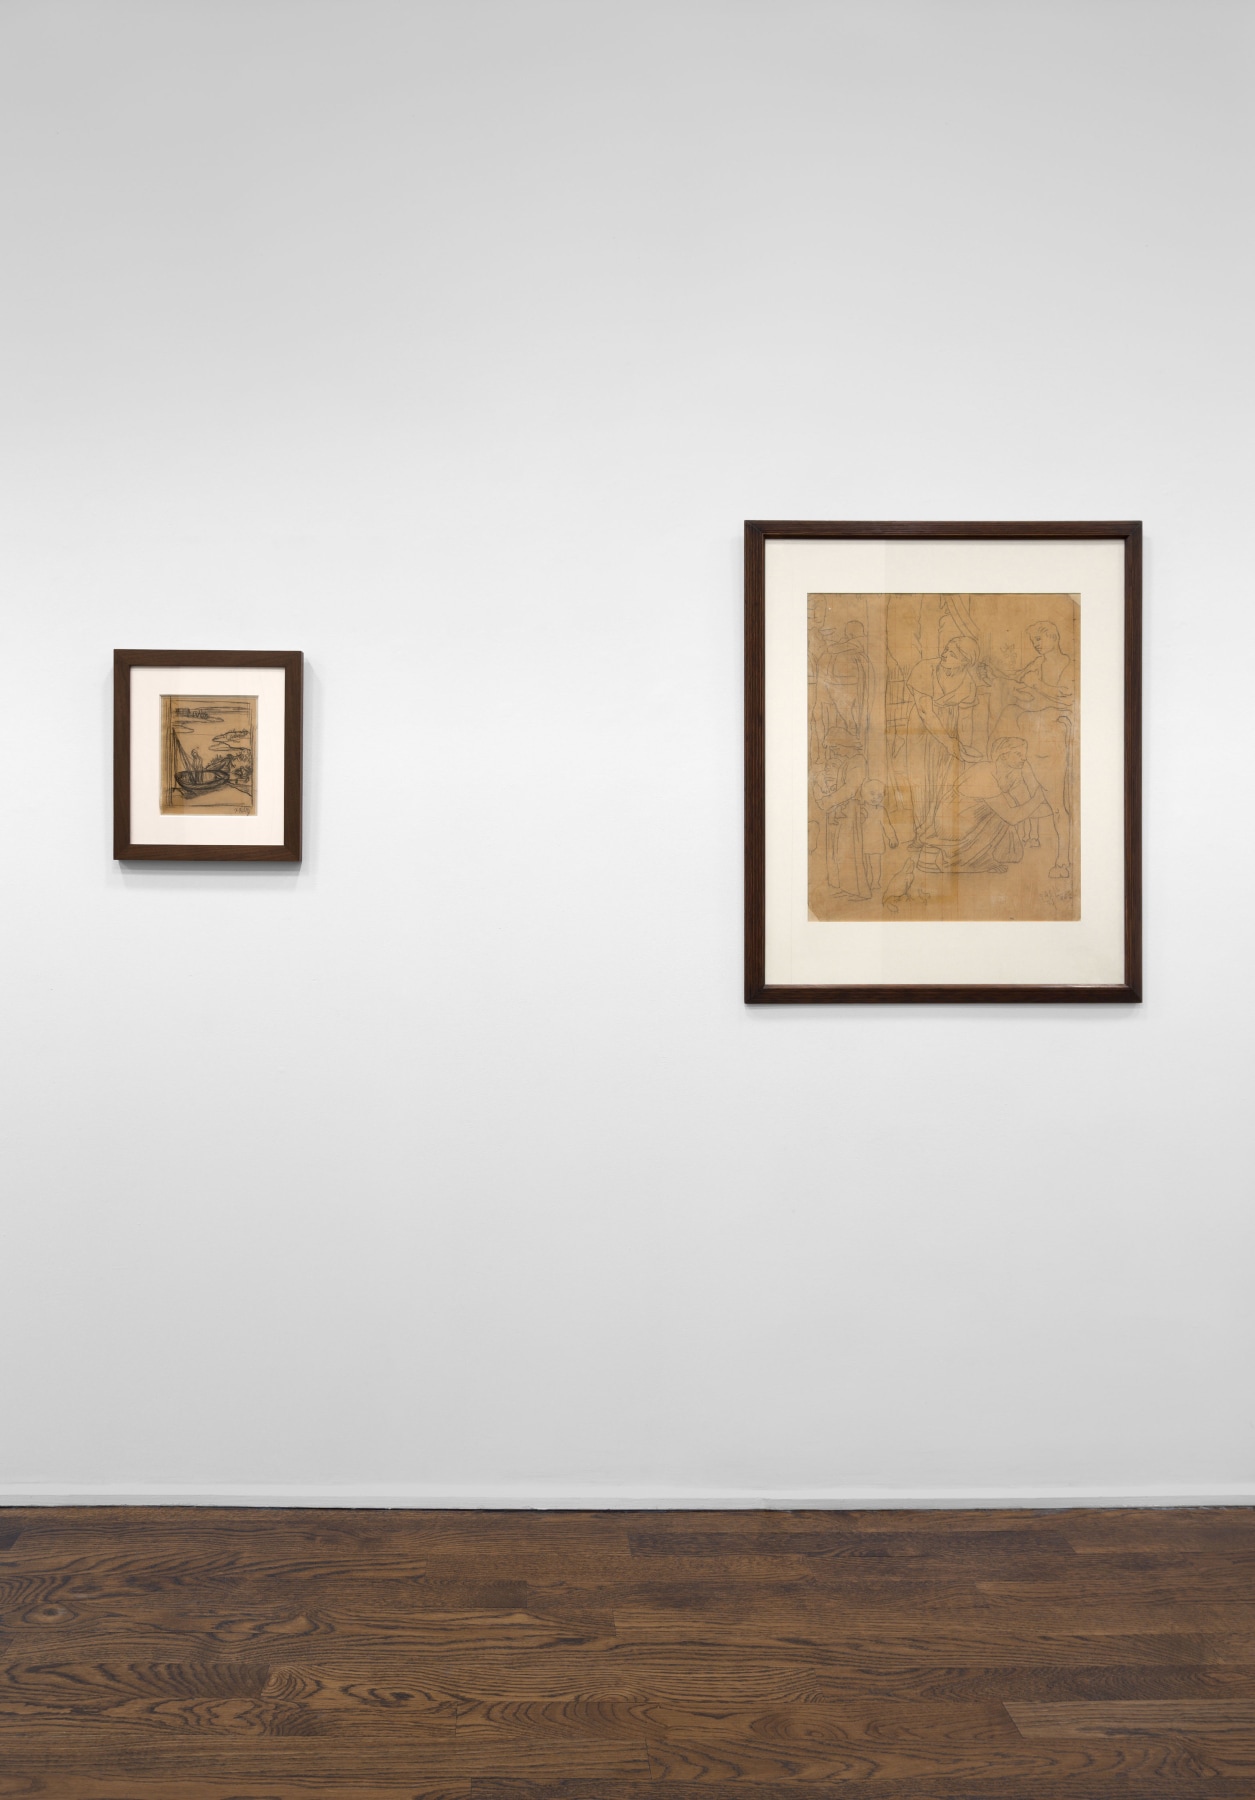 PIERRE PUVIS DE CHAVANNES, Works on Paper and Paintings, New York, 2018, Installation Image 6